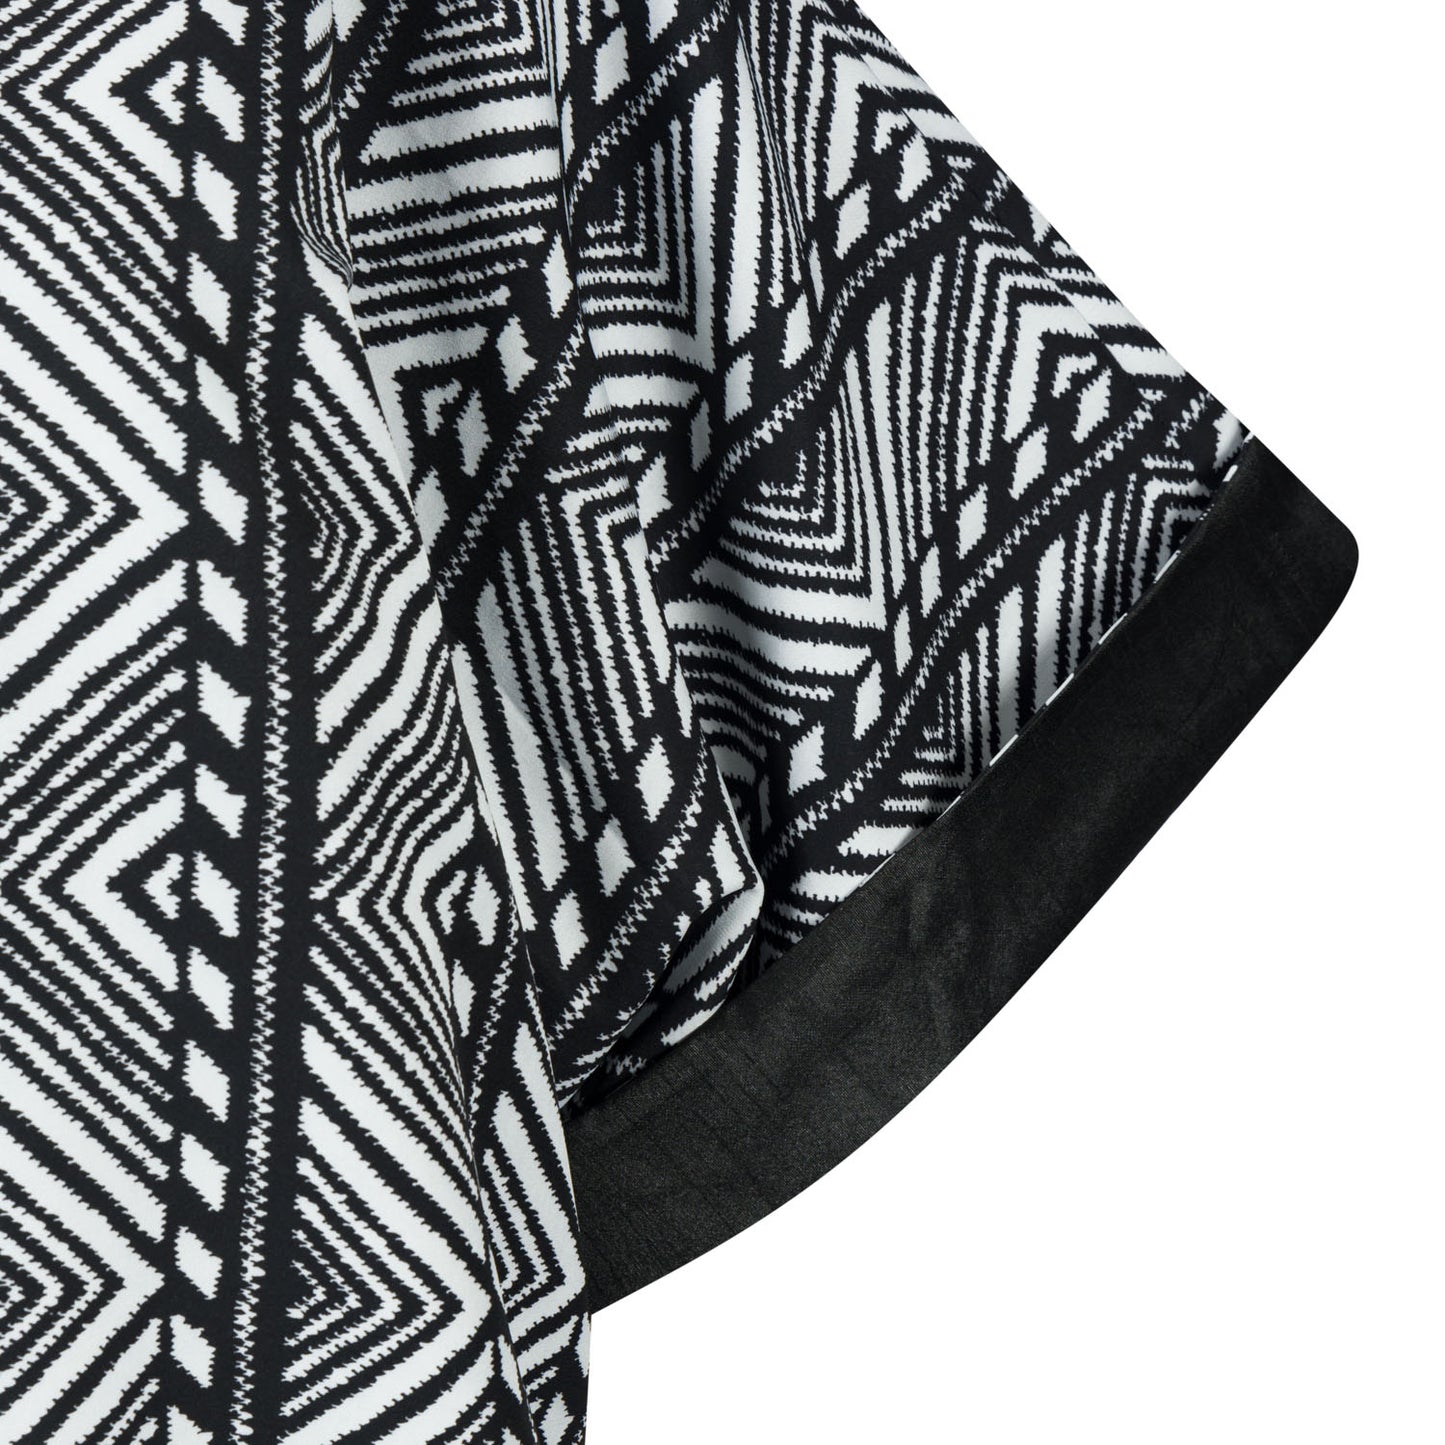 Printed Mansa CrewNeck Reversible Coat with Side Entry Pockets